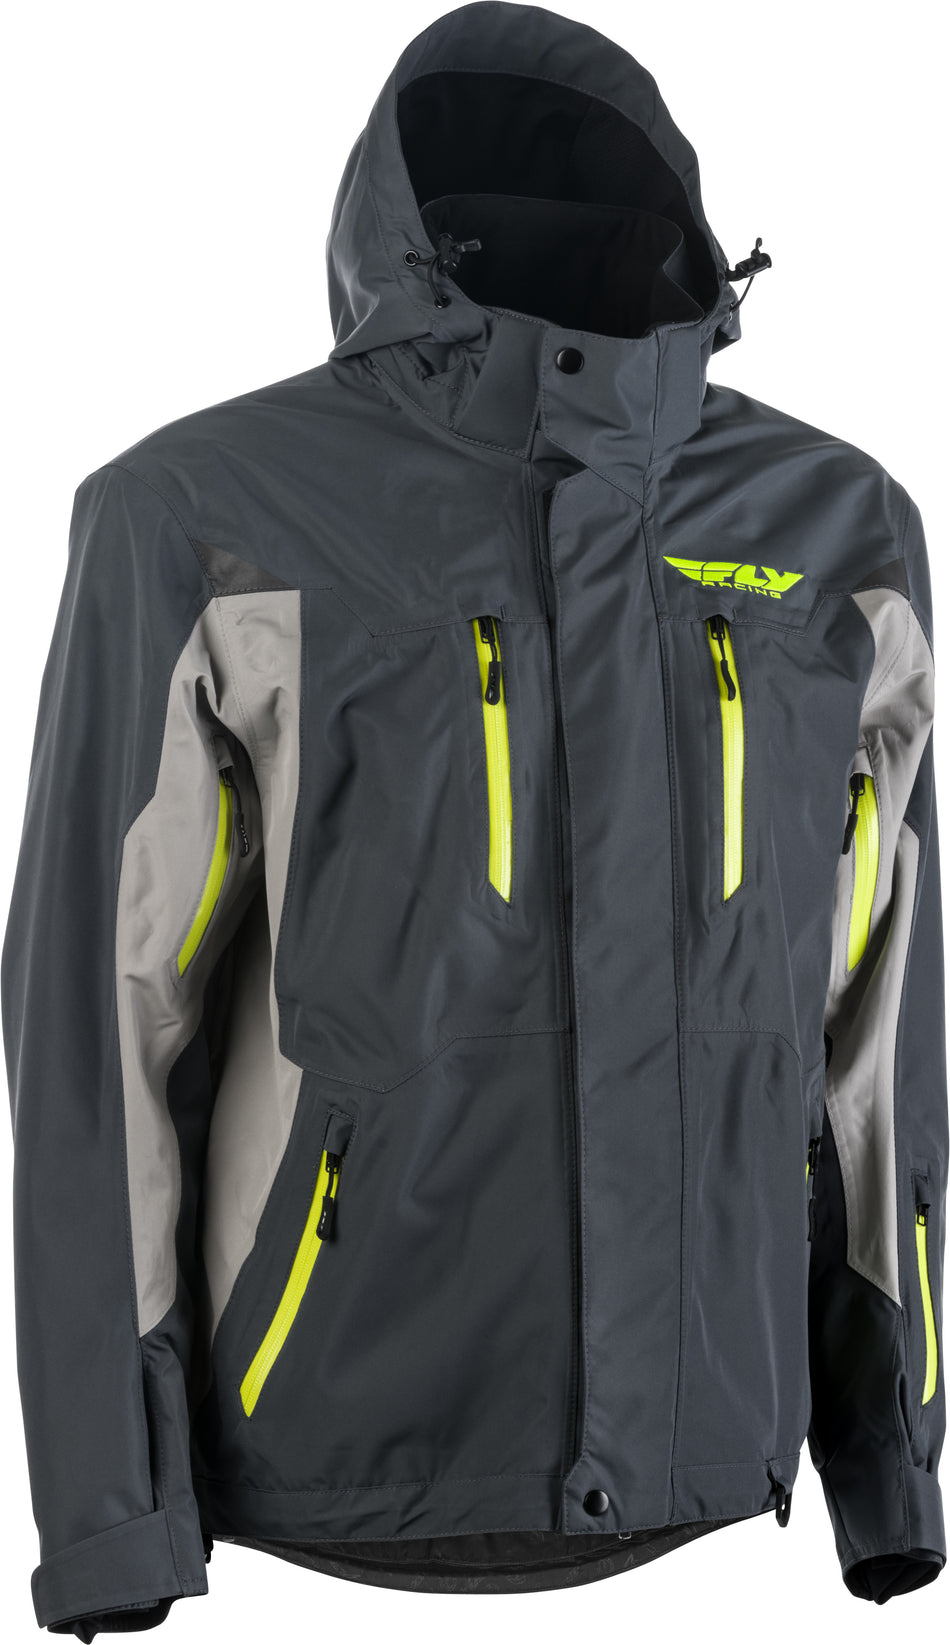 FLY RACING Fly Incline Jacket Grey/Charcoal Md 470-4101M